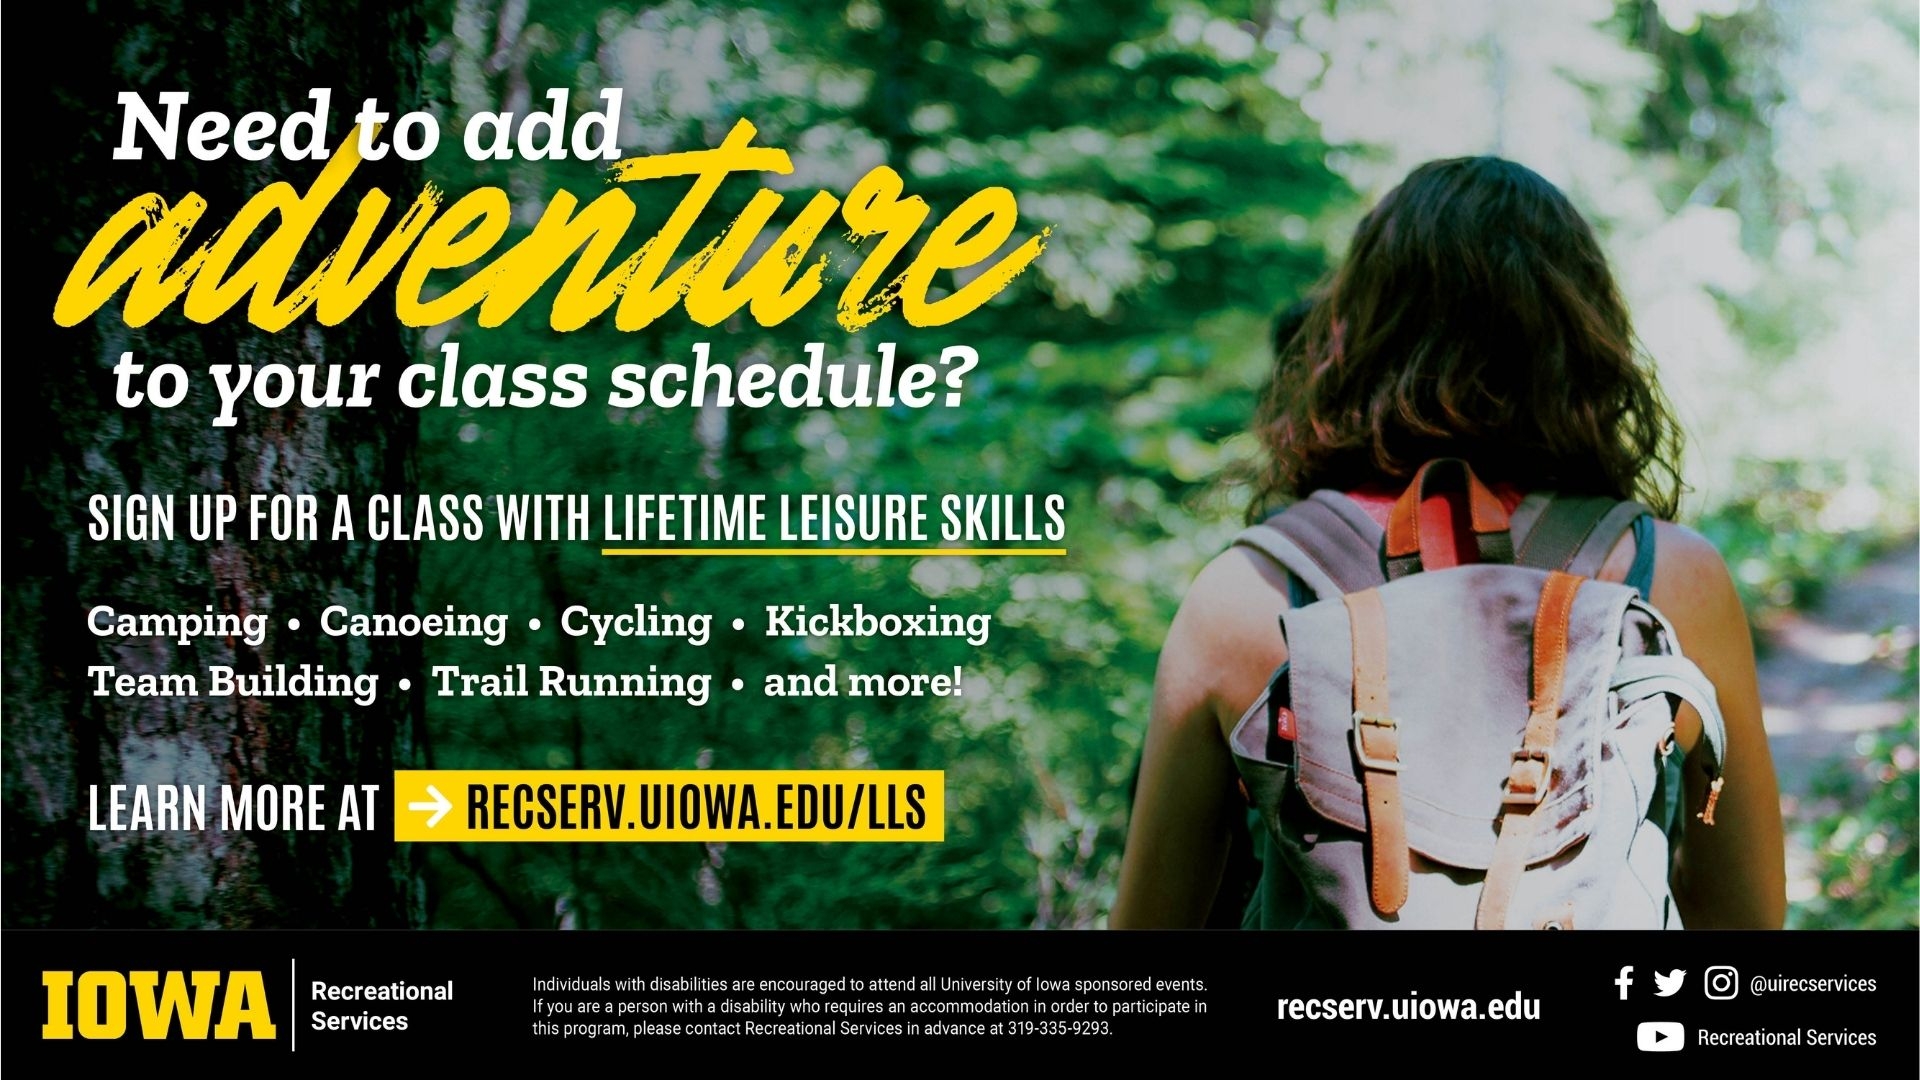 Need to add adventure to your class schedule? Sign up for a class with Lifetime Leisure Skills. Camping, Canoeing, Cycling, Kickboxing, Team Building, Trail Running, and more! Learn more at: recserv.uiowa.edu/lls